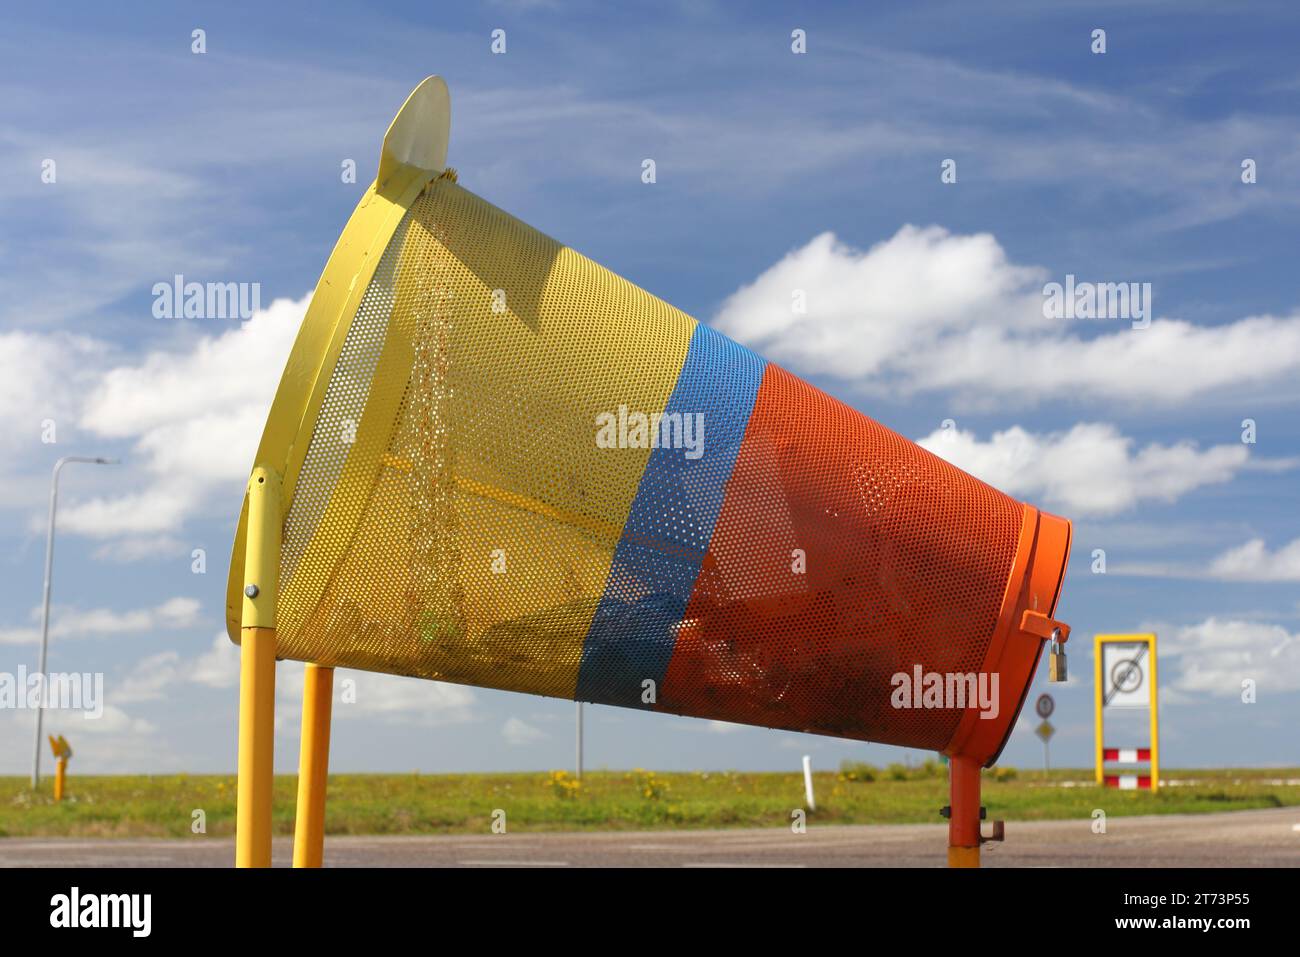 a colourful rubbish containers for cyclists, with blue sky in the background Stock Photo